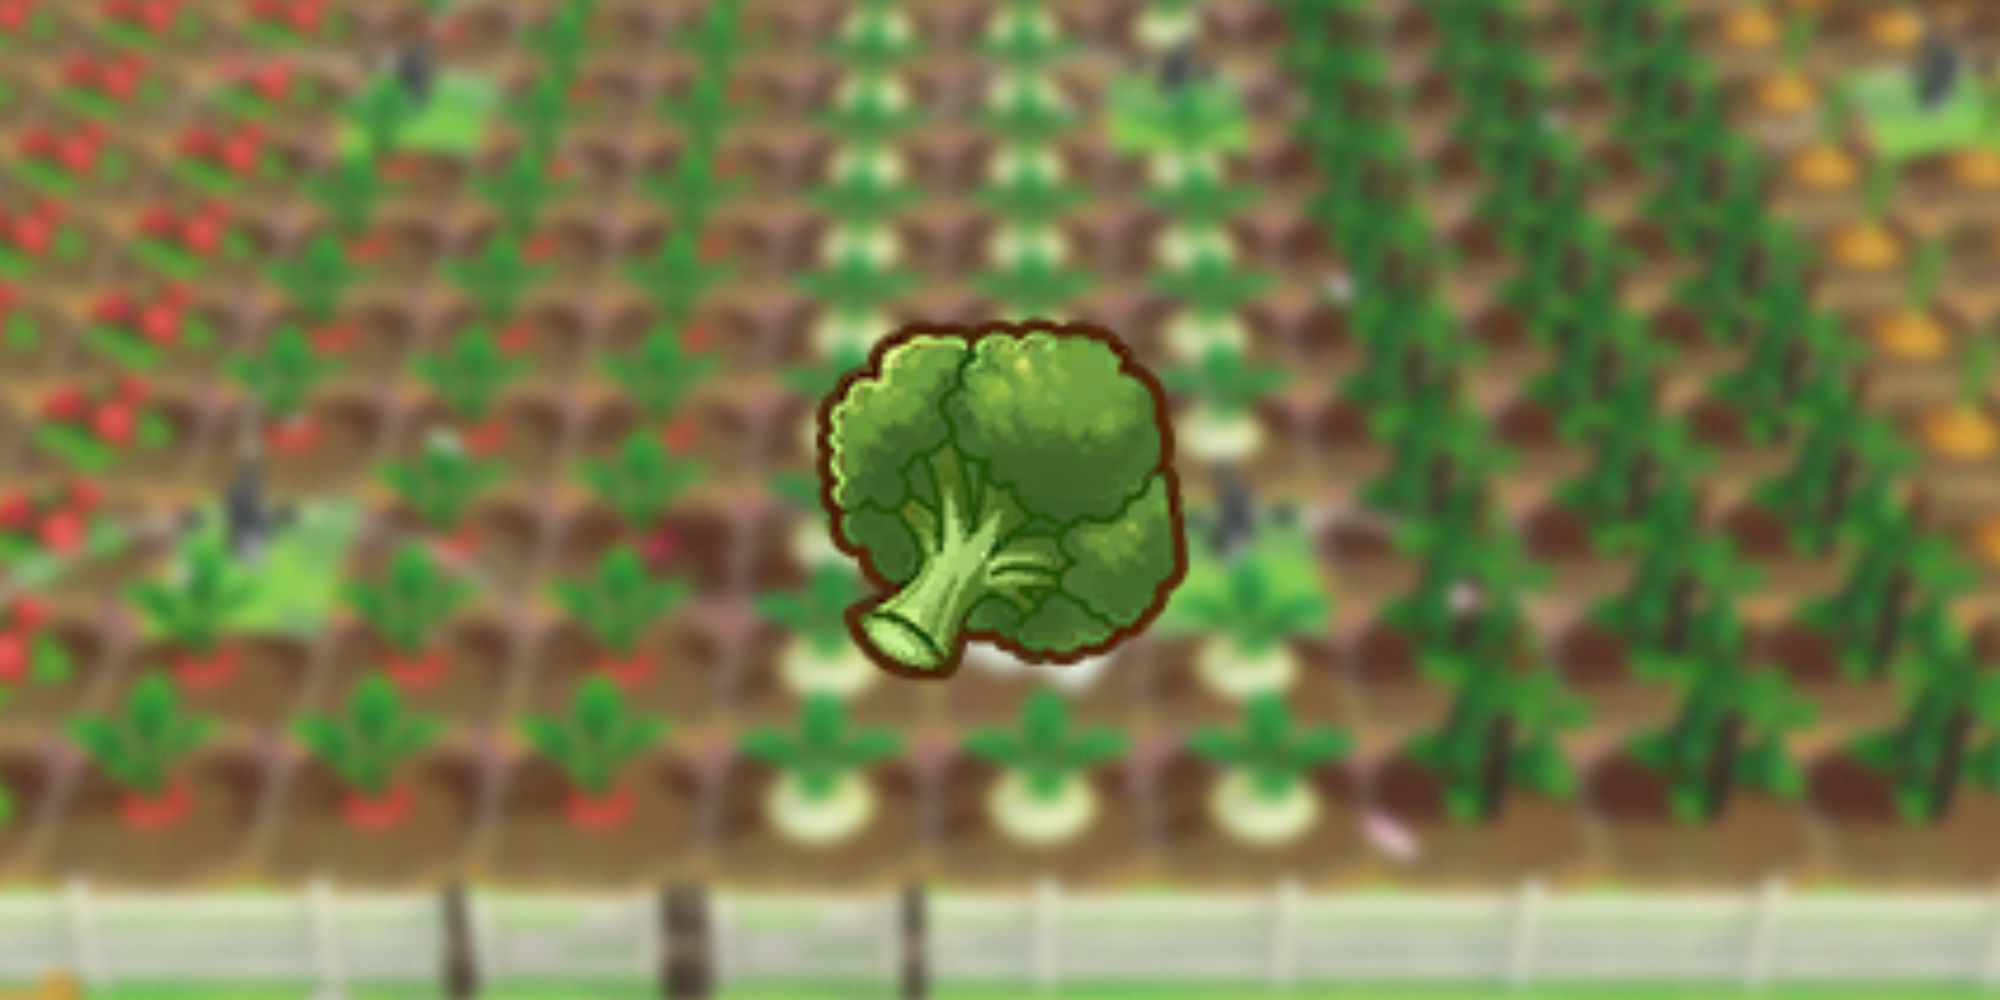 Broccoli icon as it would be seen in players inventory over blurred background of crops in game